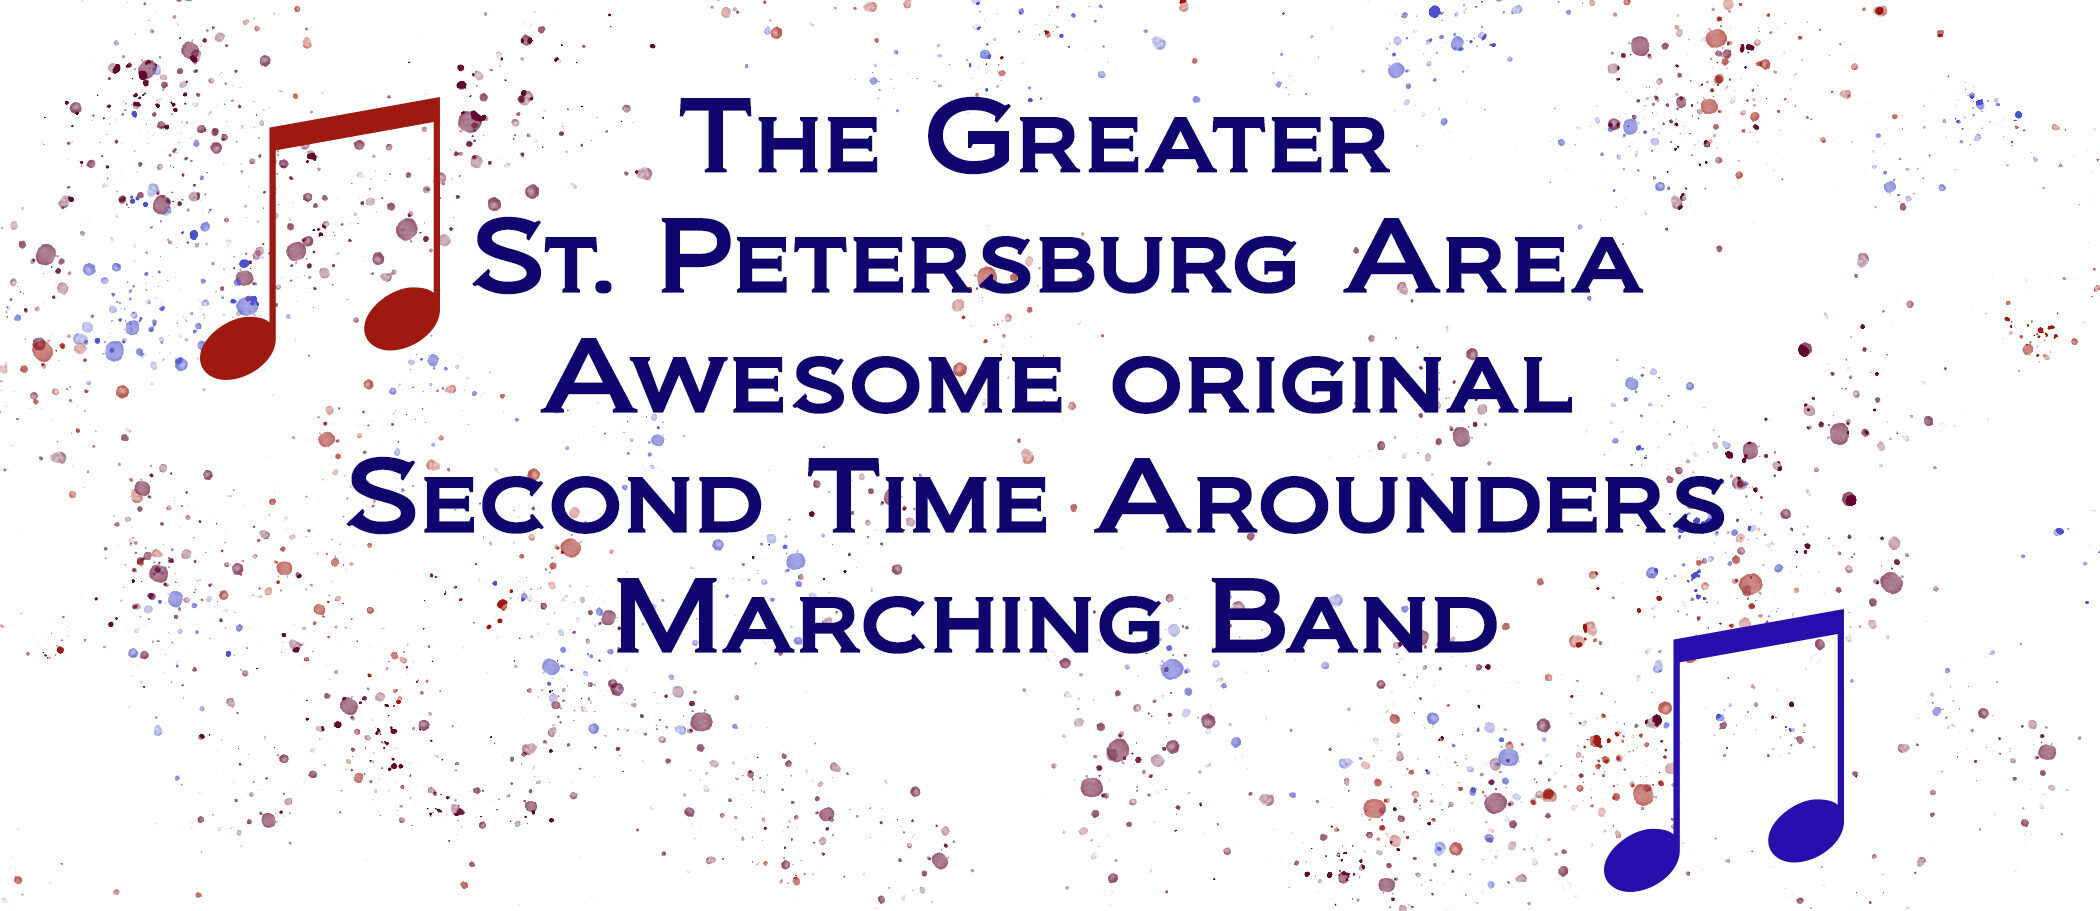 The Greater St. Petersburg Area, Awesome, Original, Second Time Arounders Marching Band